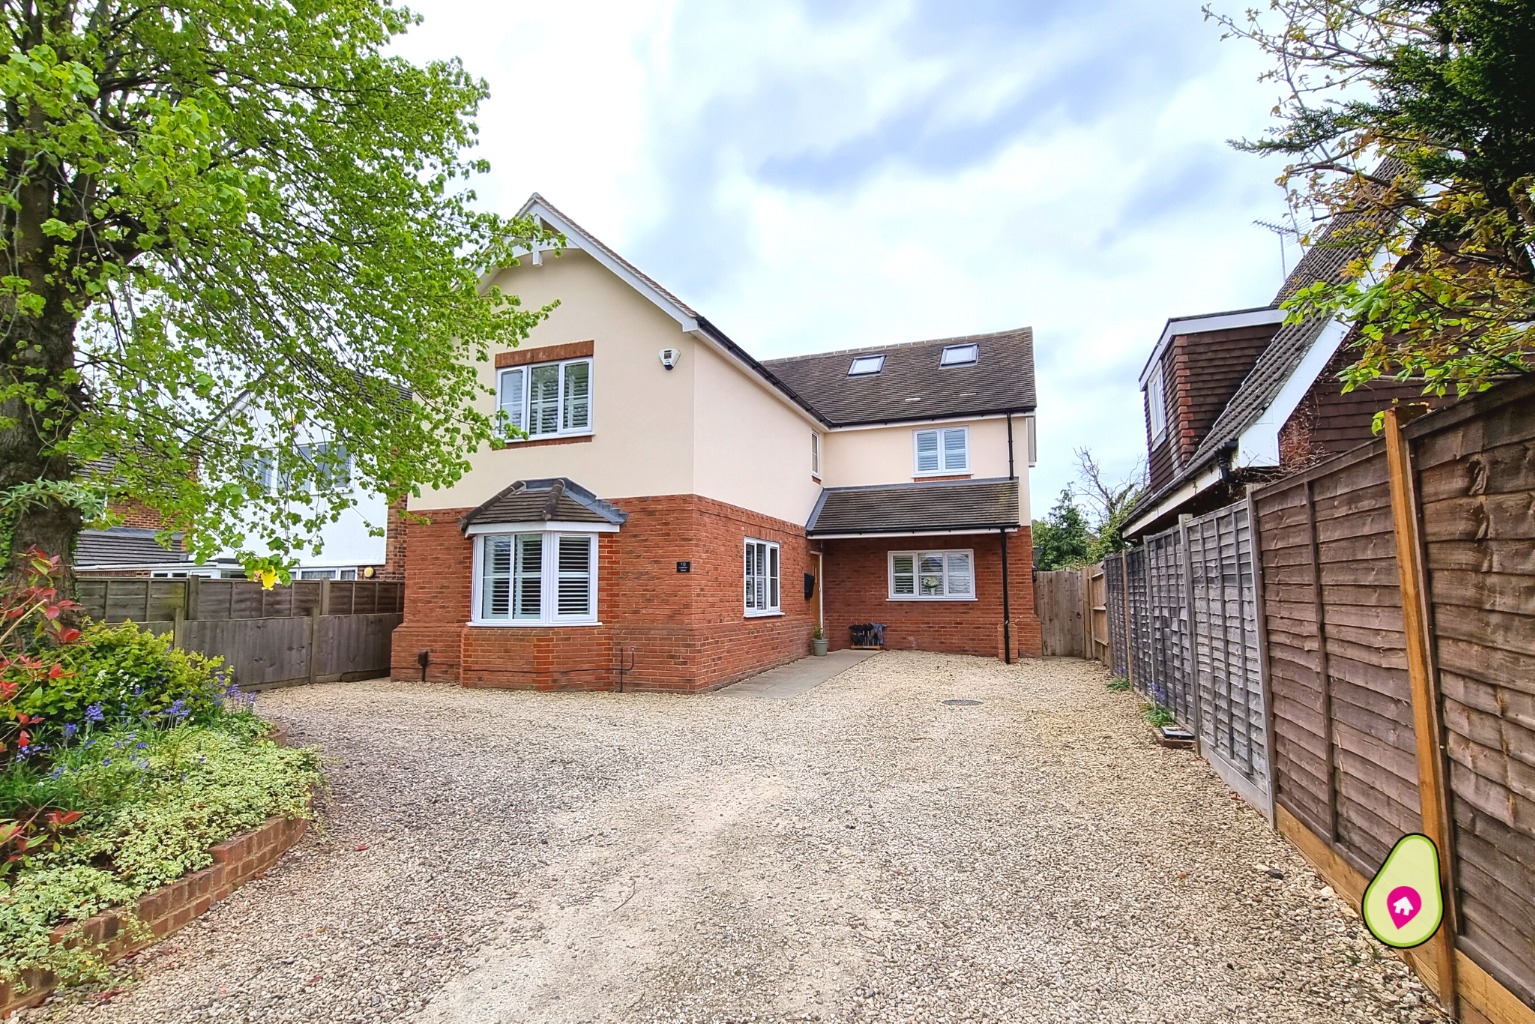 This immaculate, five bedroom, non-estate detached house would make the perfect family home. The house sits in a superb spot just minutes away from great schools and local amenities. Offering five proper double bedrooms and some excellent downstairs space including a home office in the garden.